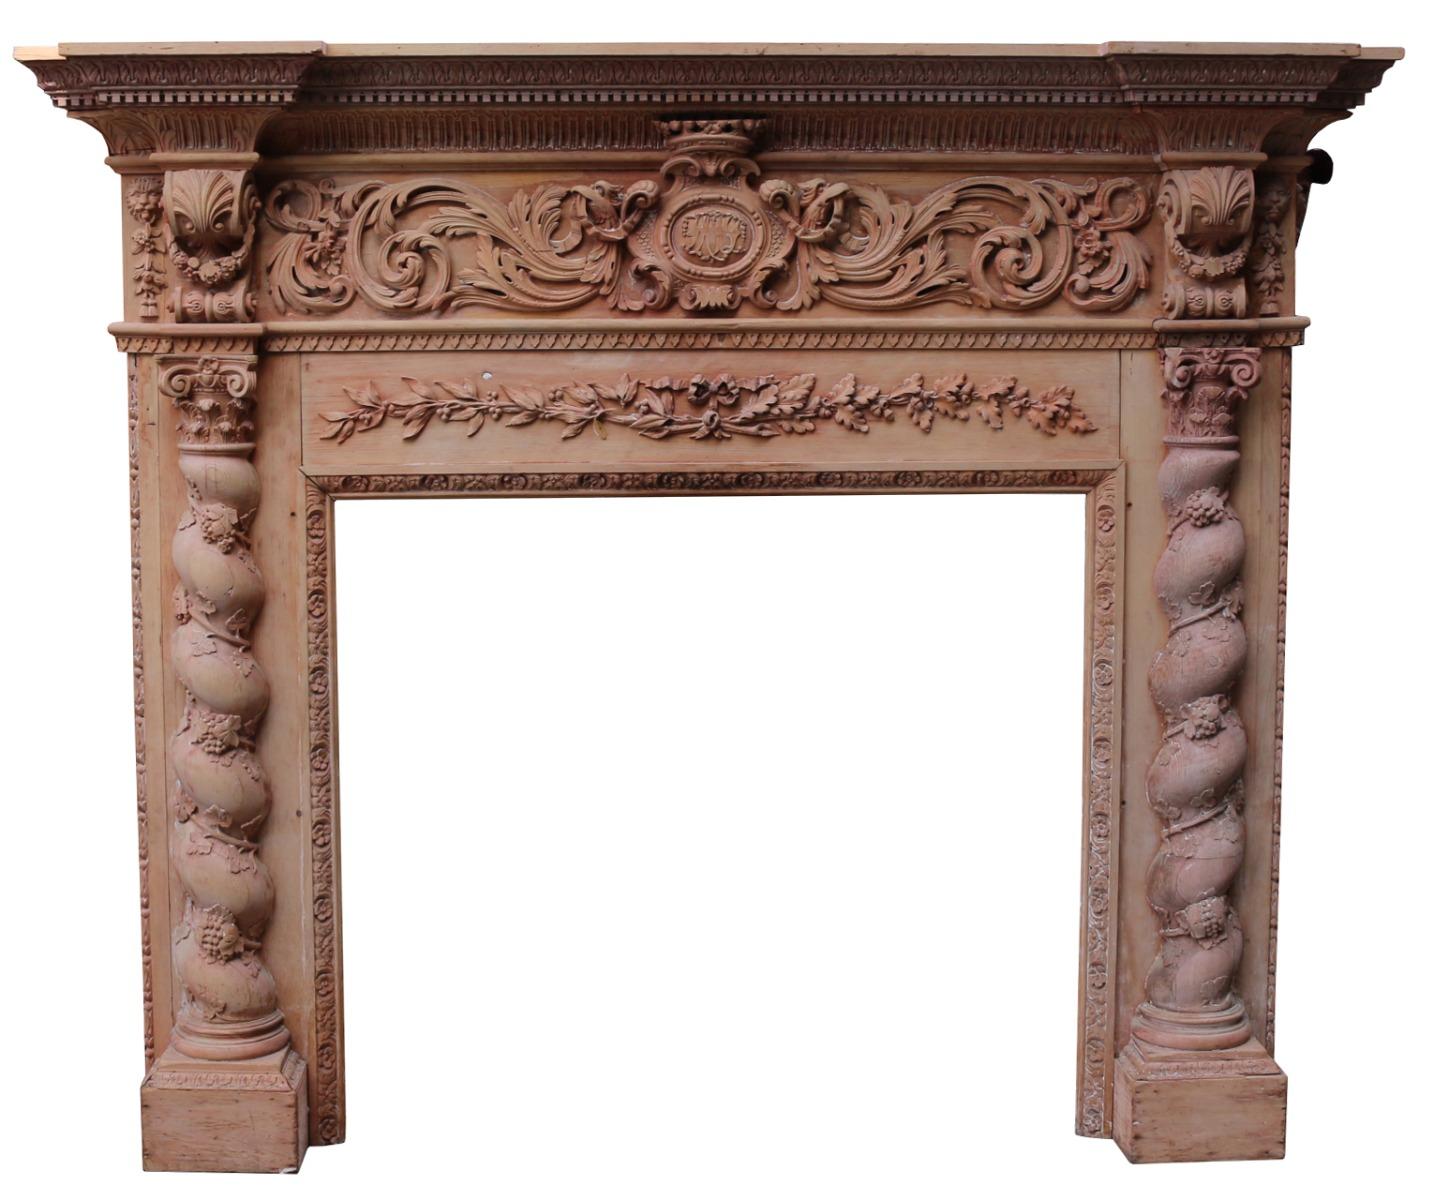 George III fire surround with acanthus, dental, fluted pediment, scrolled frieze and decorated with birds, spiral and leaf decoration.

Measures: Opening height 116 cm

Opening width 130 cm

Width between outside of legs 202.5 cm.